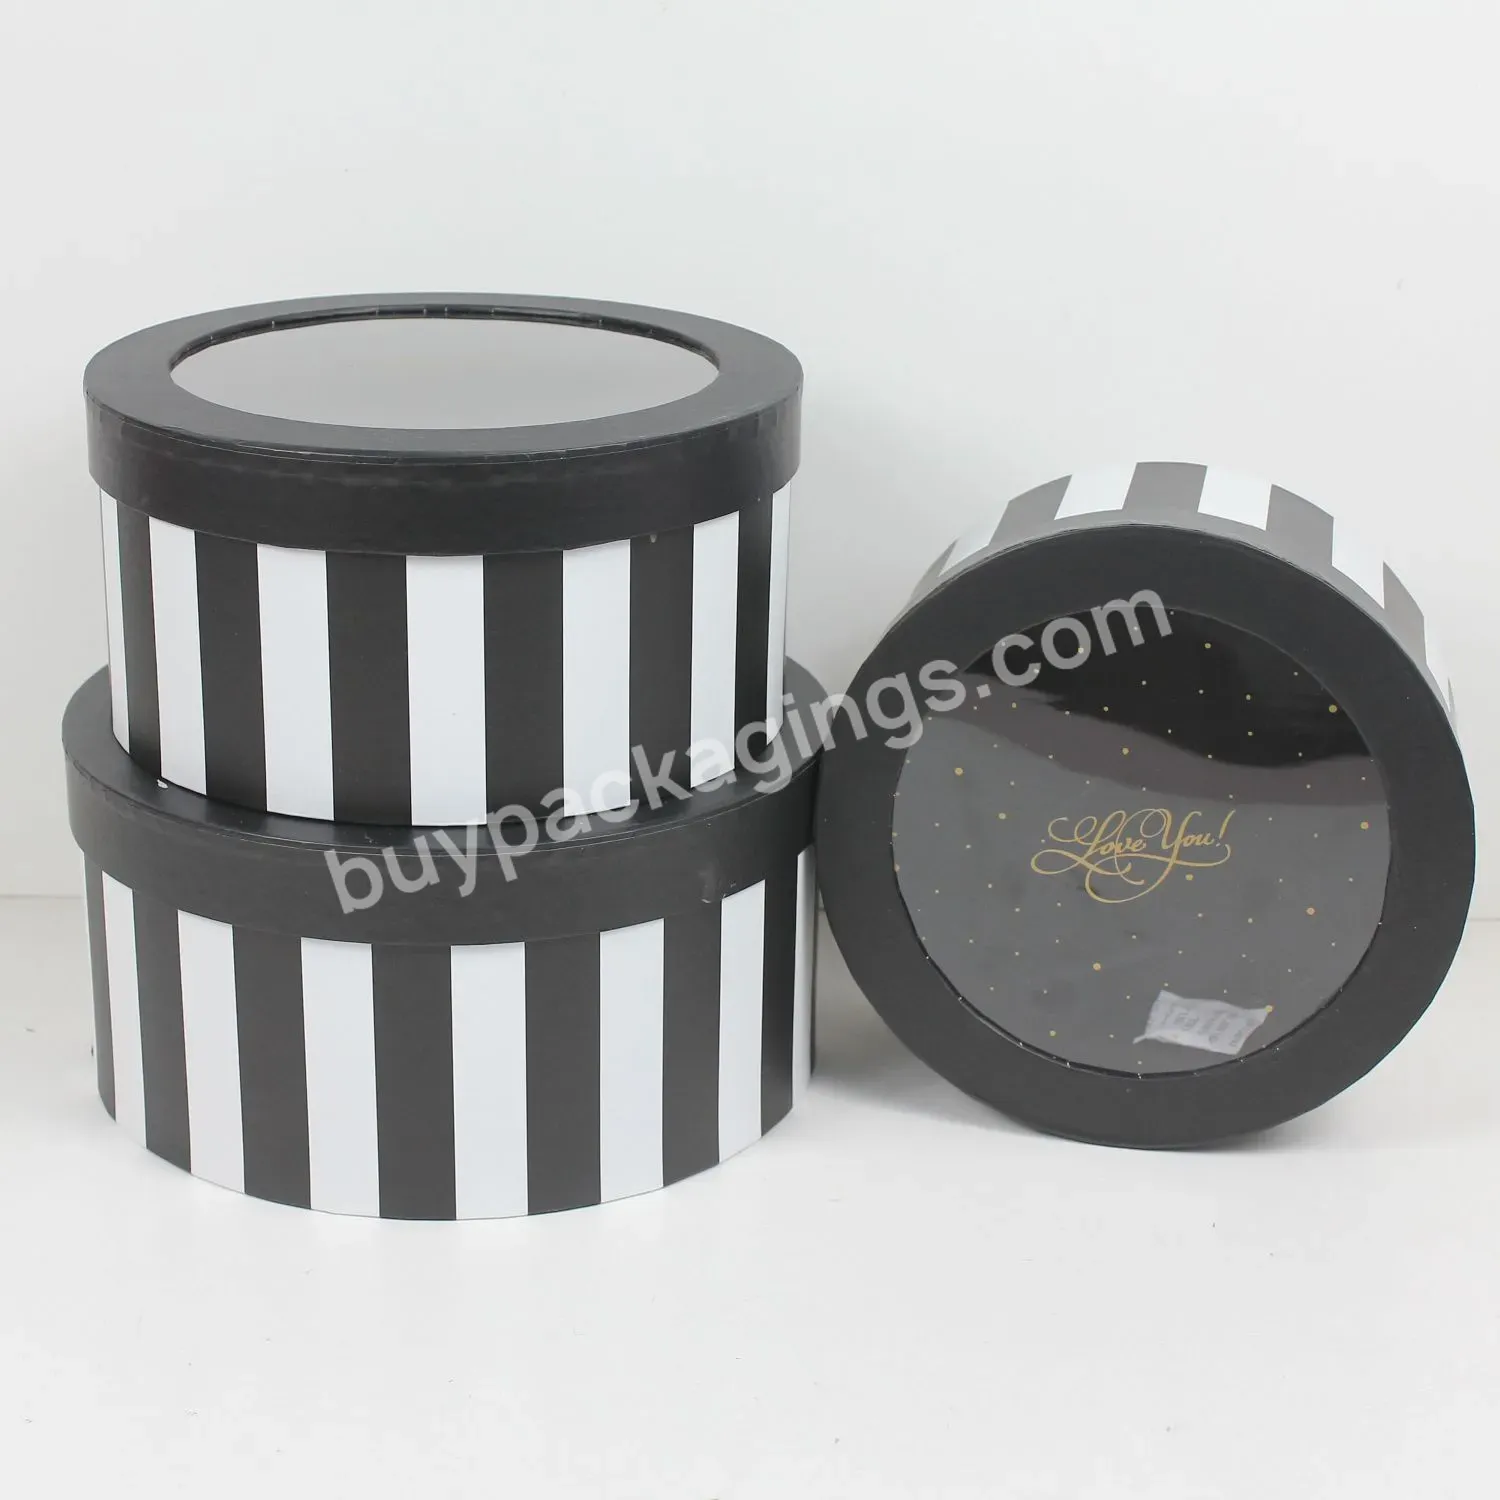 Wholesale Rounded Flower Box Arrangement Clear Pvc Window Paper Box With Striped Pattern Printing - Buy Rounded Flower Box Arrangement,Clear Pvc Window Paper Box,Paper Box With Striped Pattern Printing.